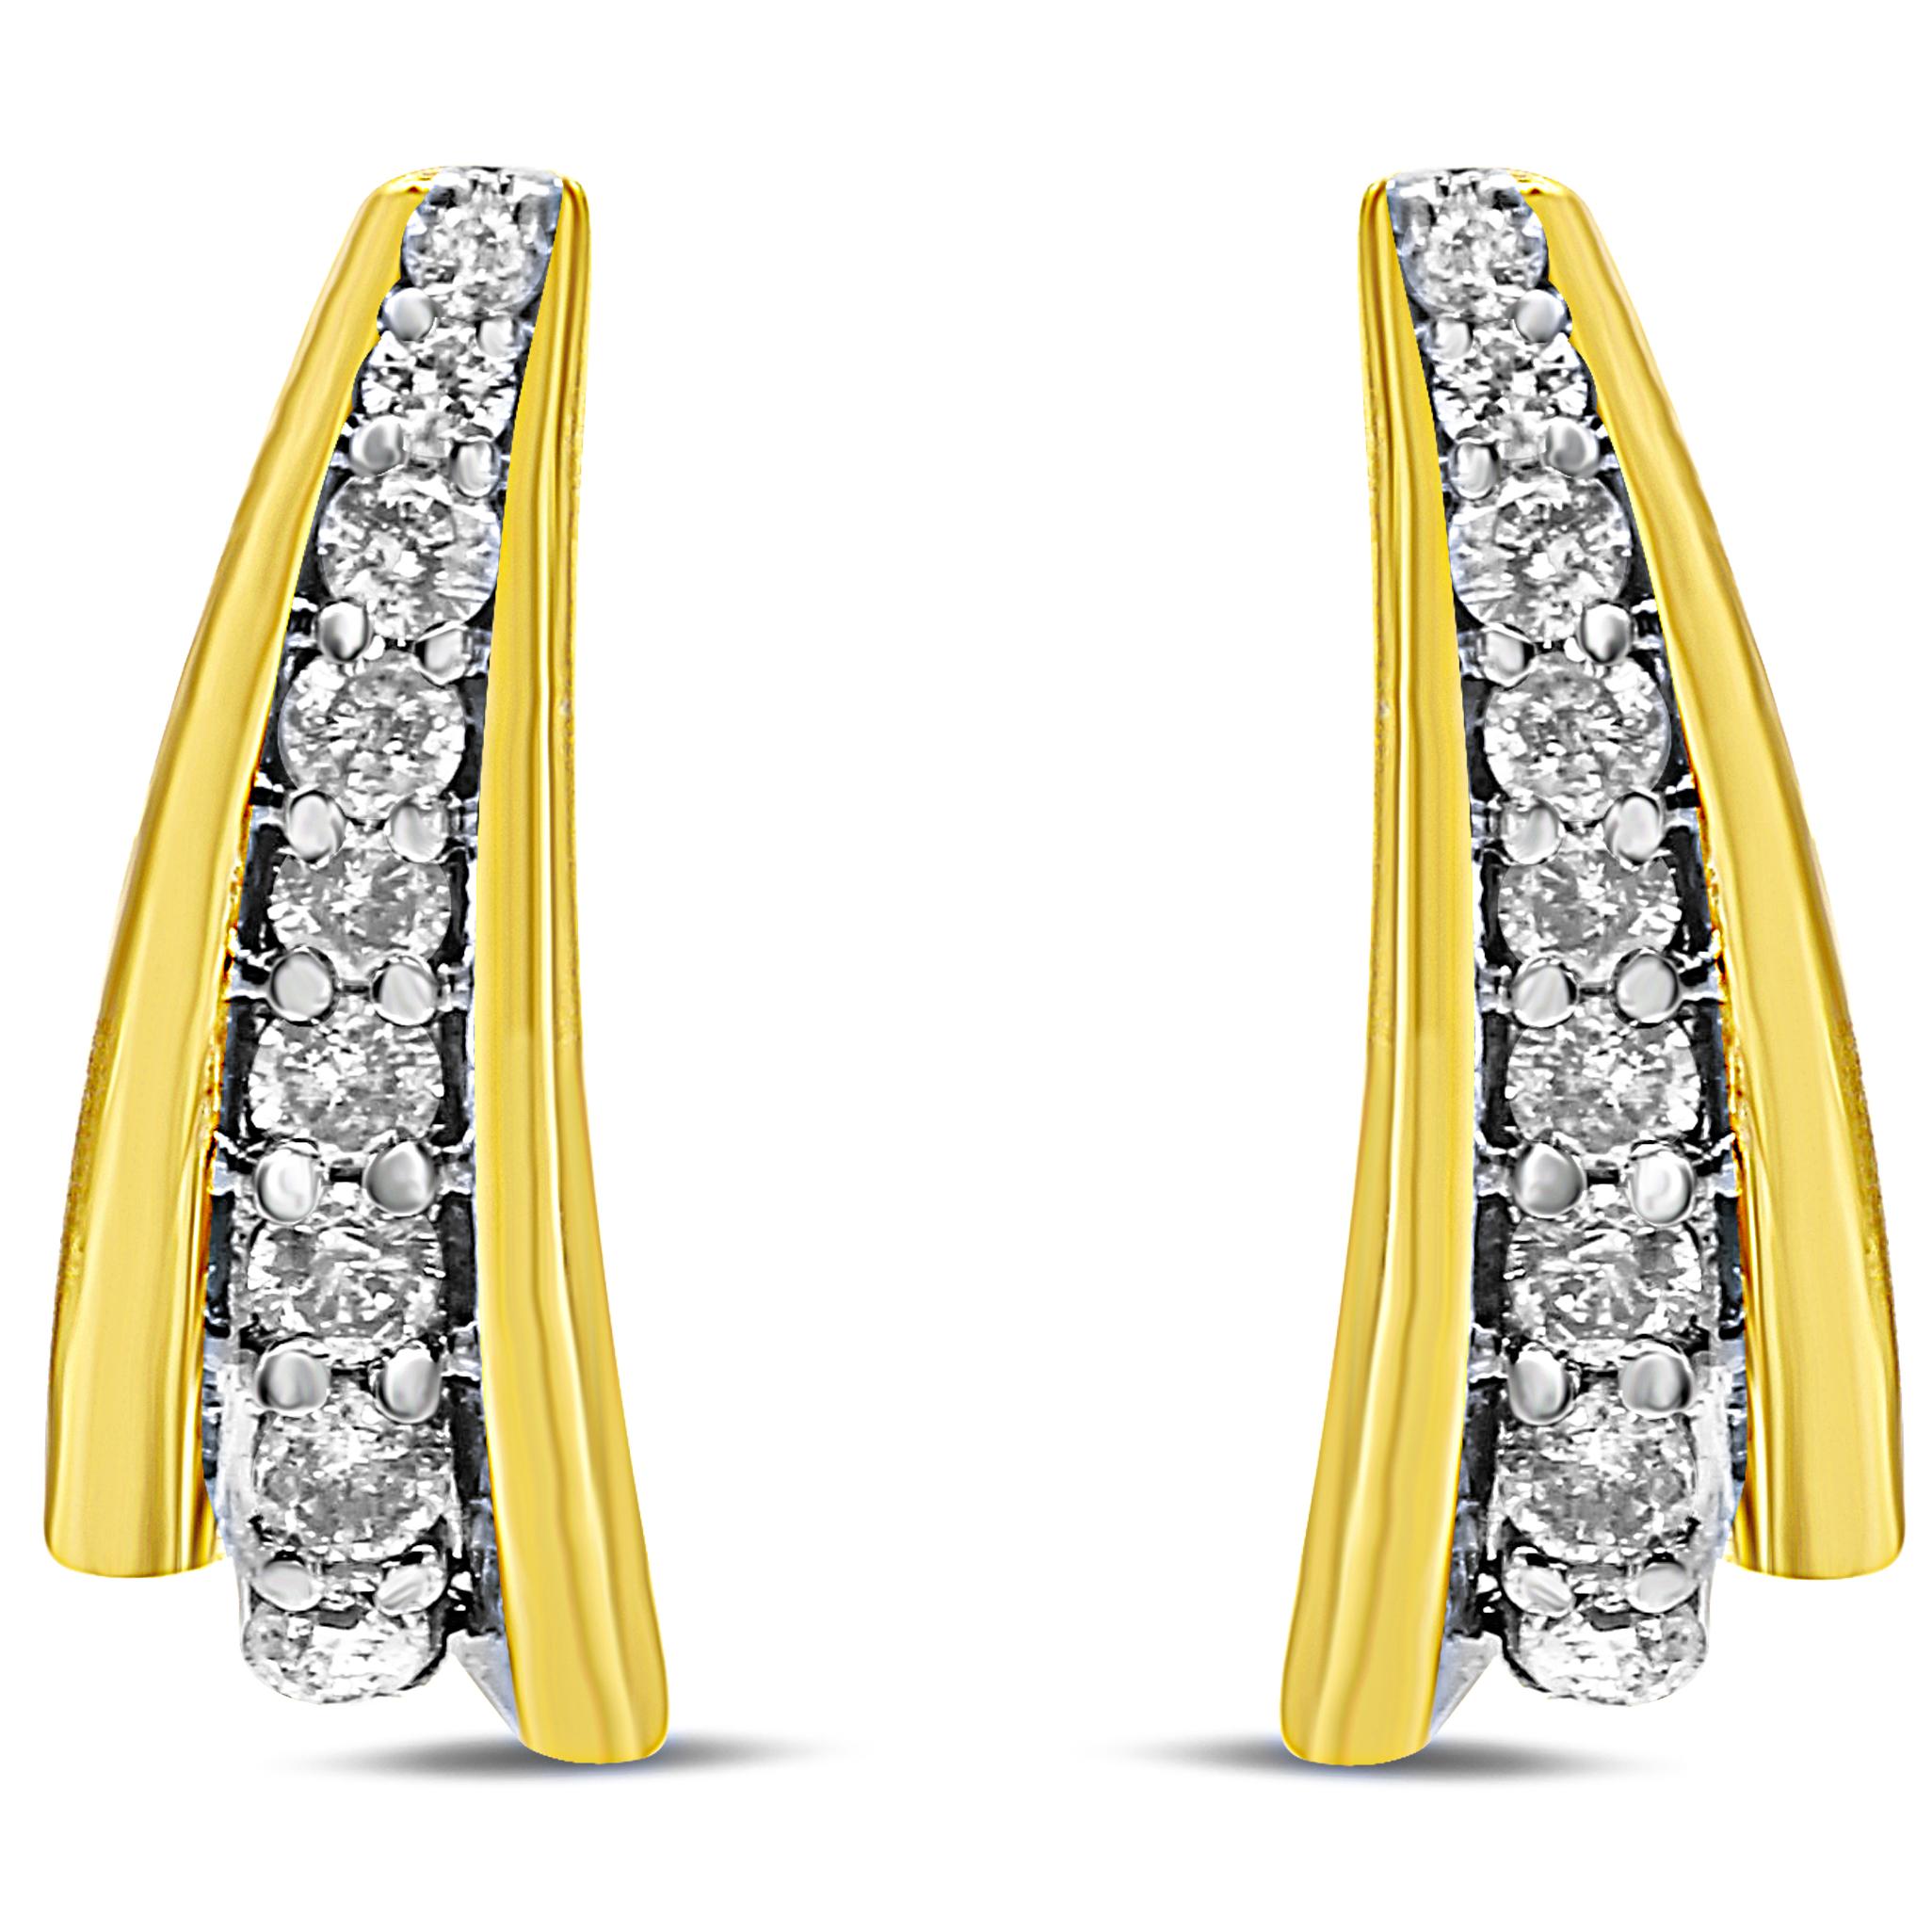 The refined sense of elegance displayed in these diamond huggie earrings is marvelous. Sparkling with a total 1.00 cttw round diamonds with an approximate I-J color and I2-I3 clarity, the diamonds are featured in a graduated ascent of smallest to